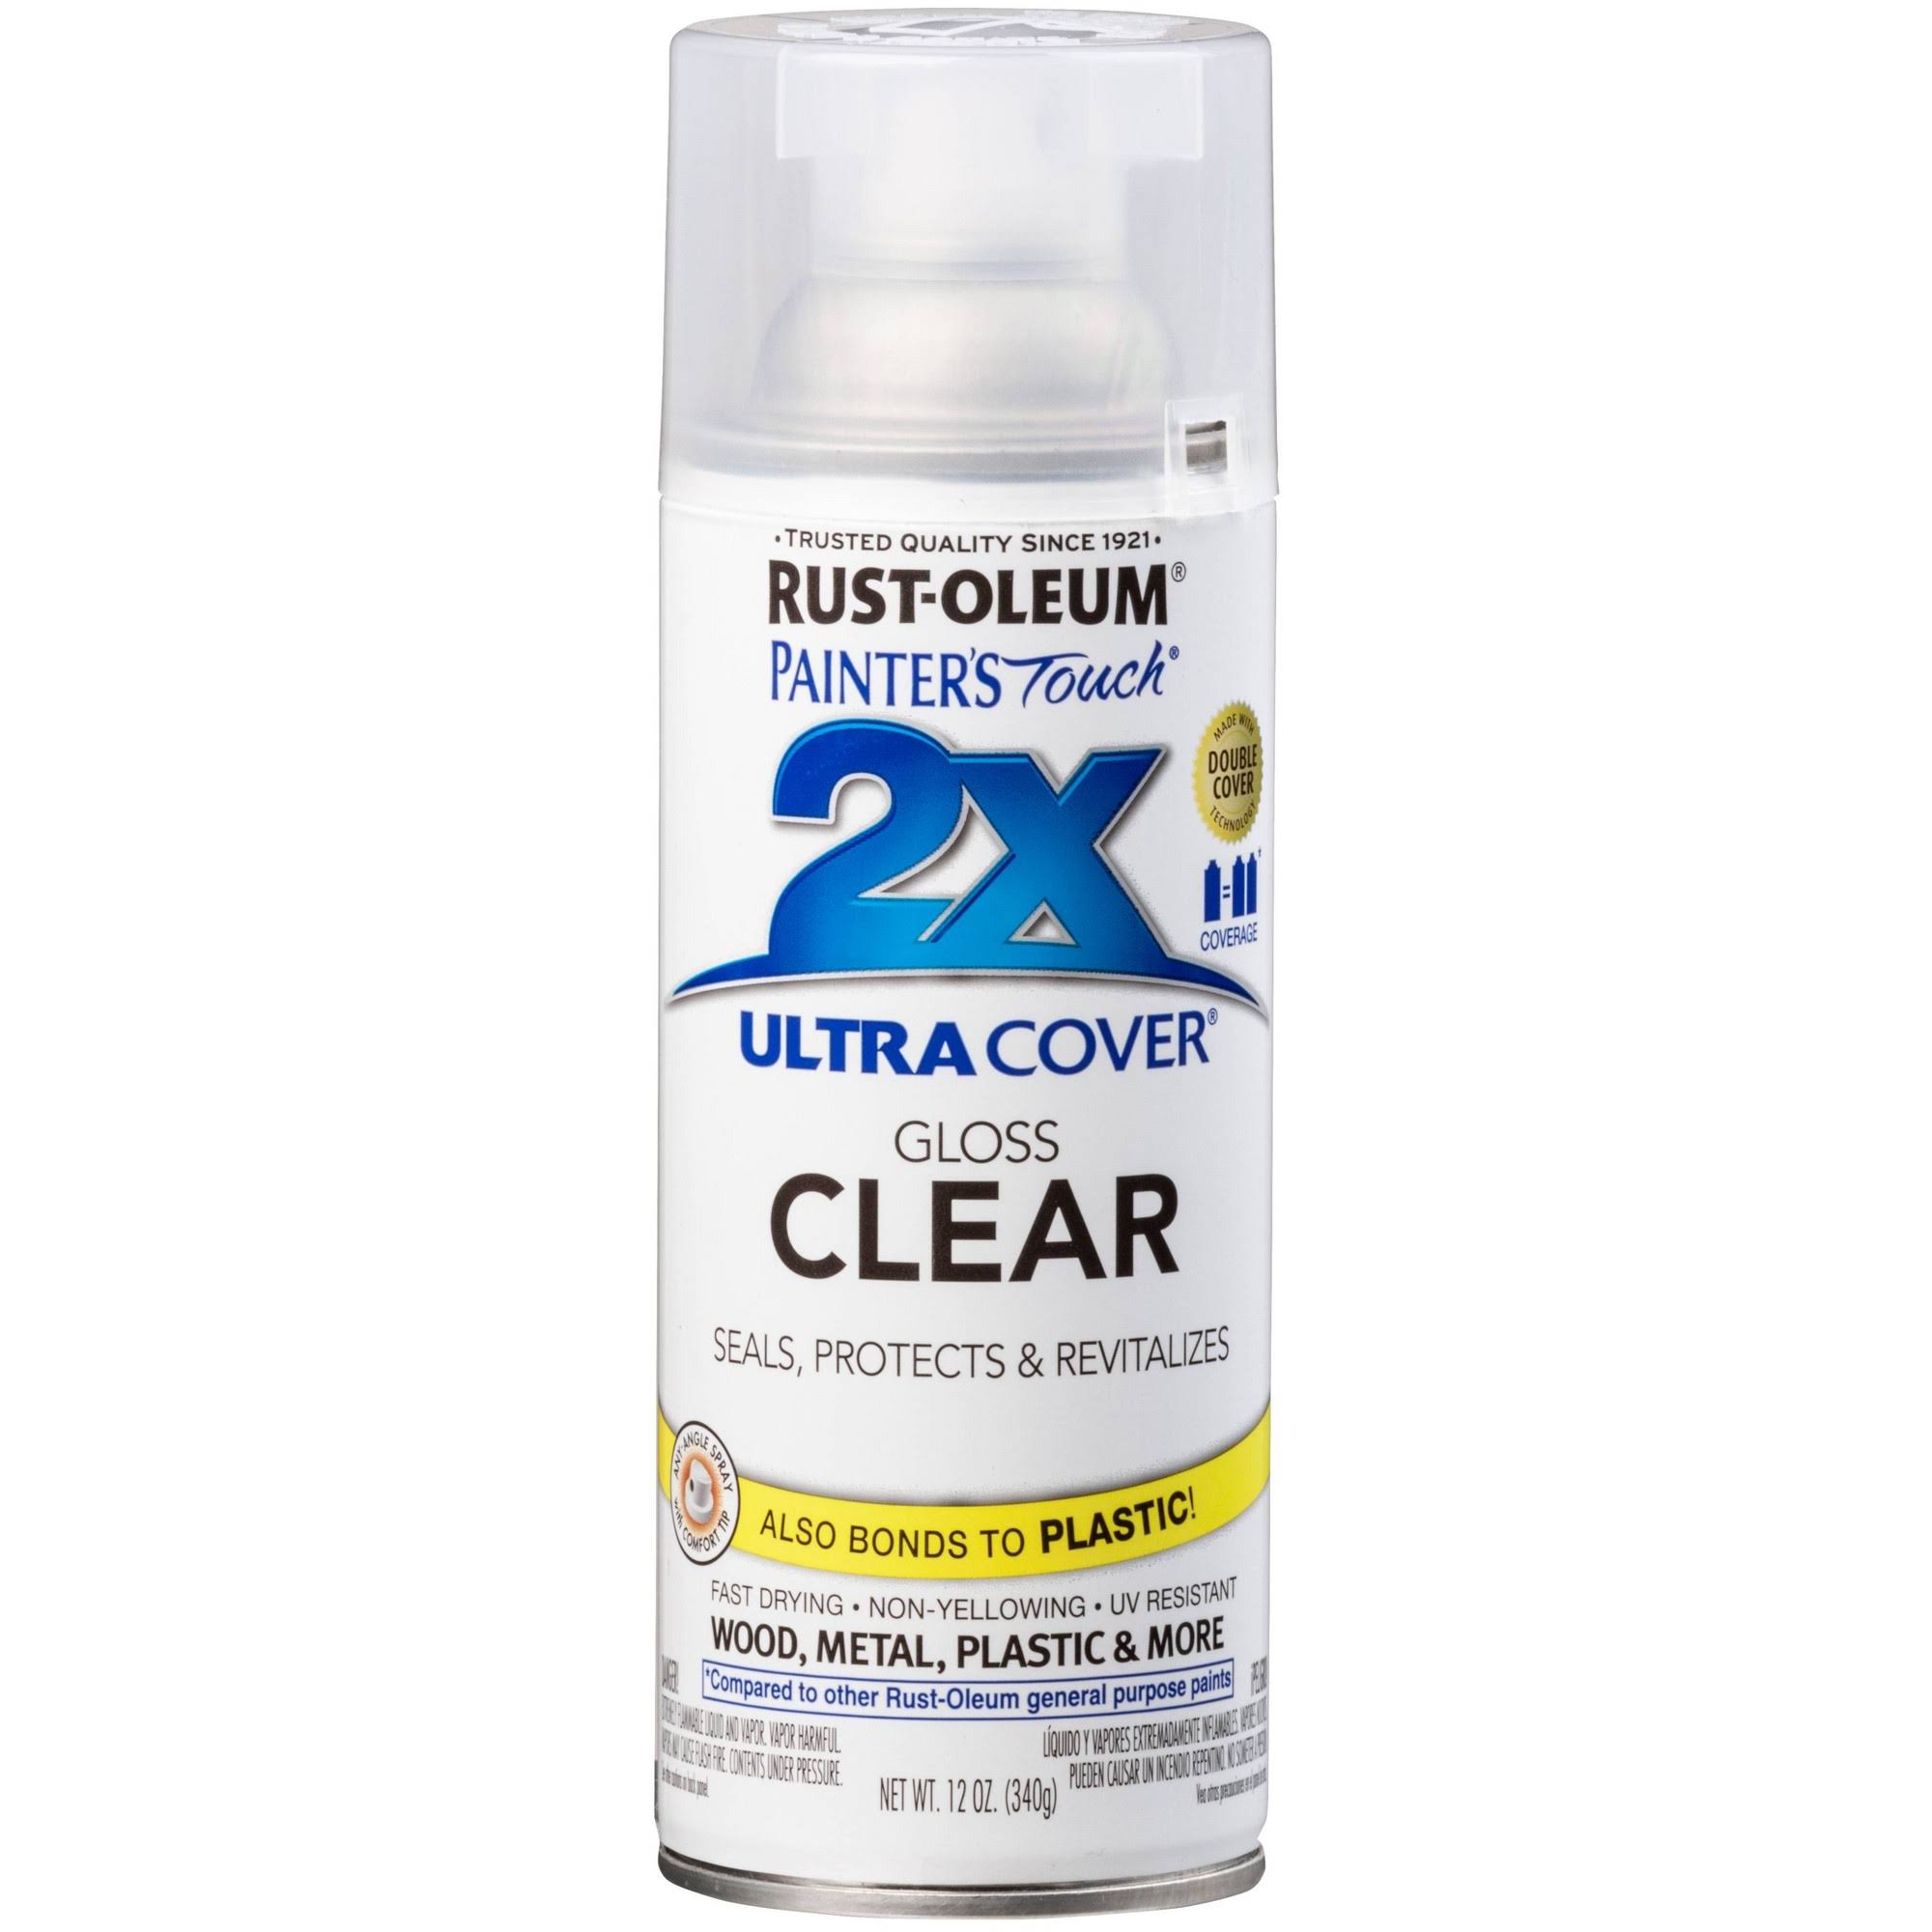 Rust-Oleum Painter's Touch 2X General Purpose Spray Paint - Gloss Clear, 12oz